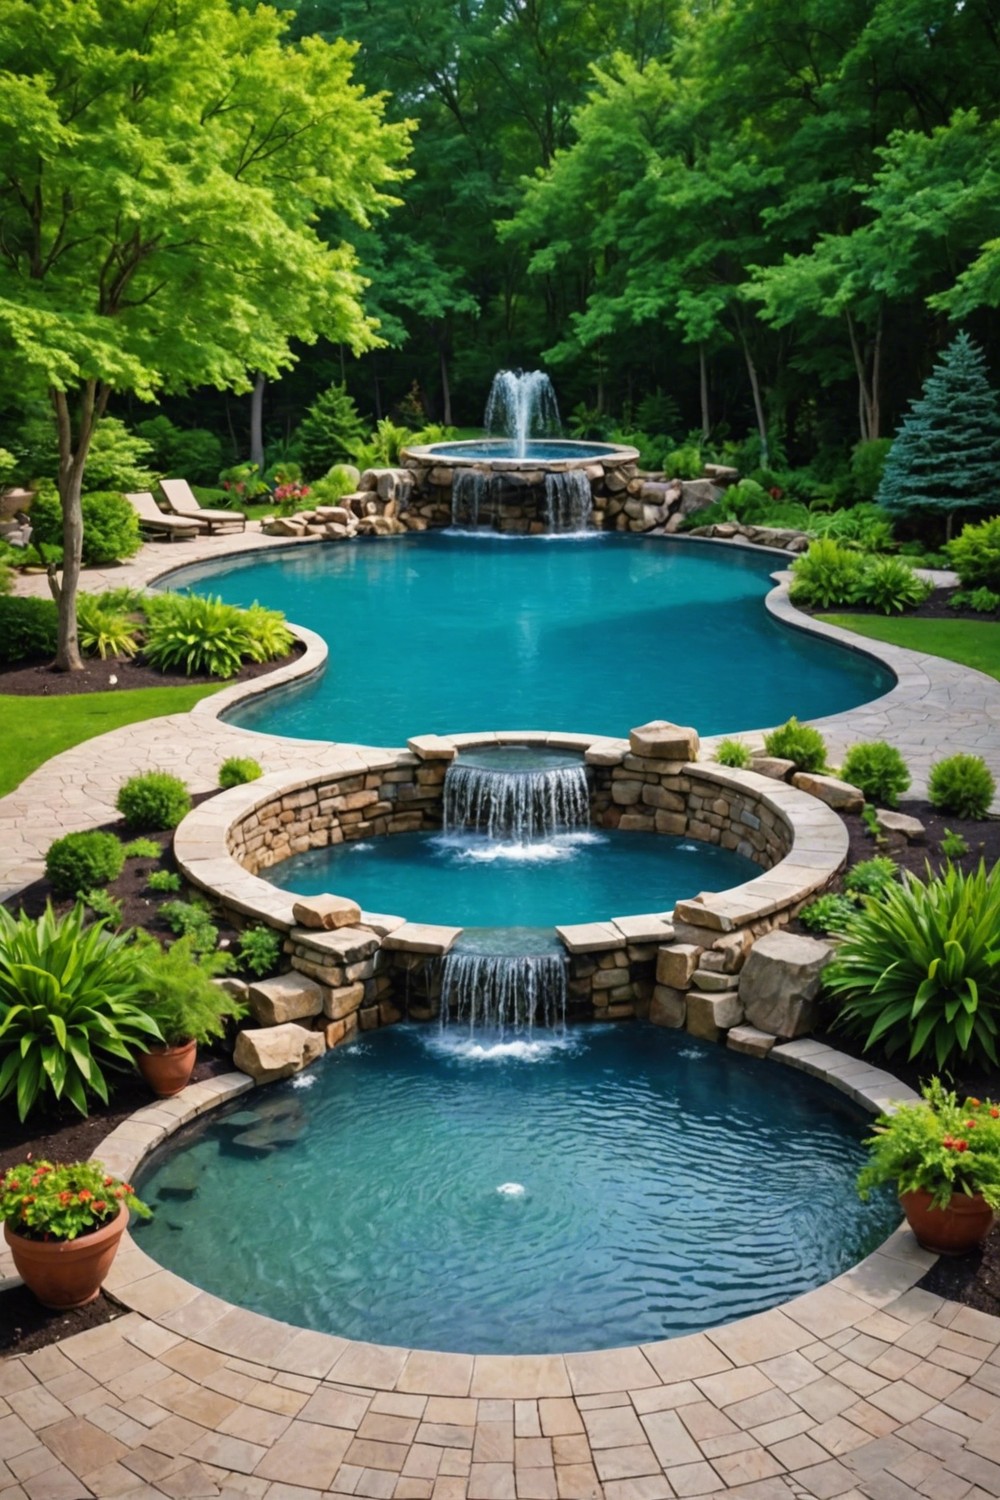 Round Pool with Water Features